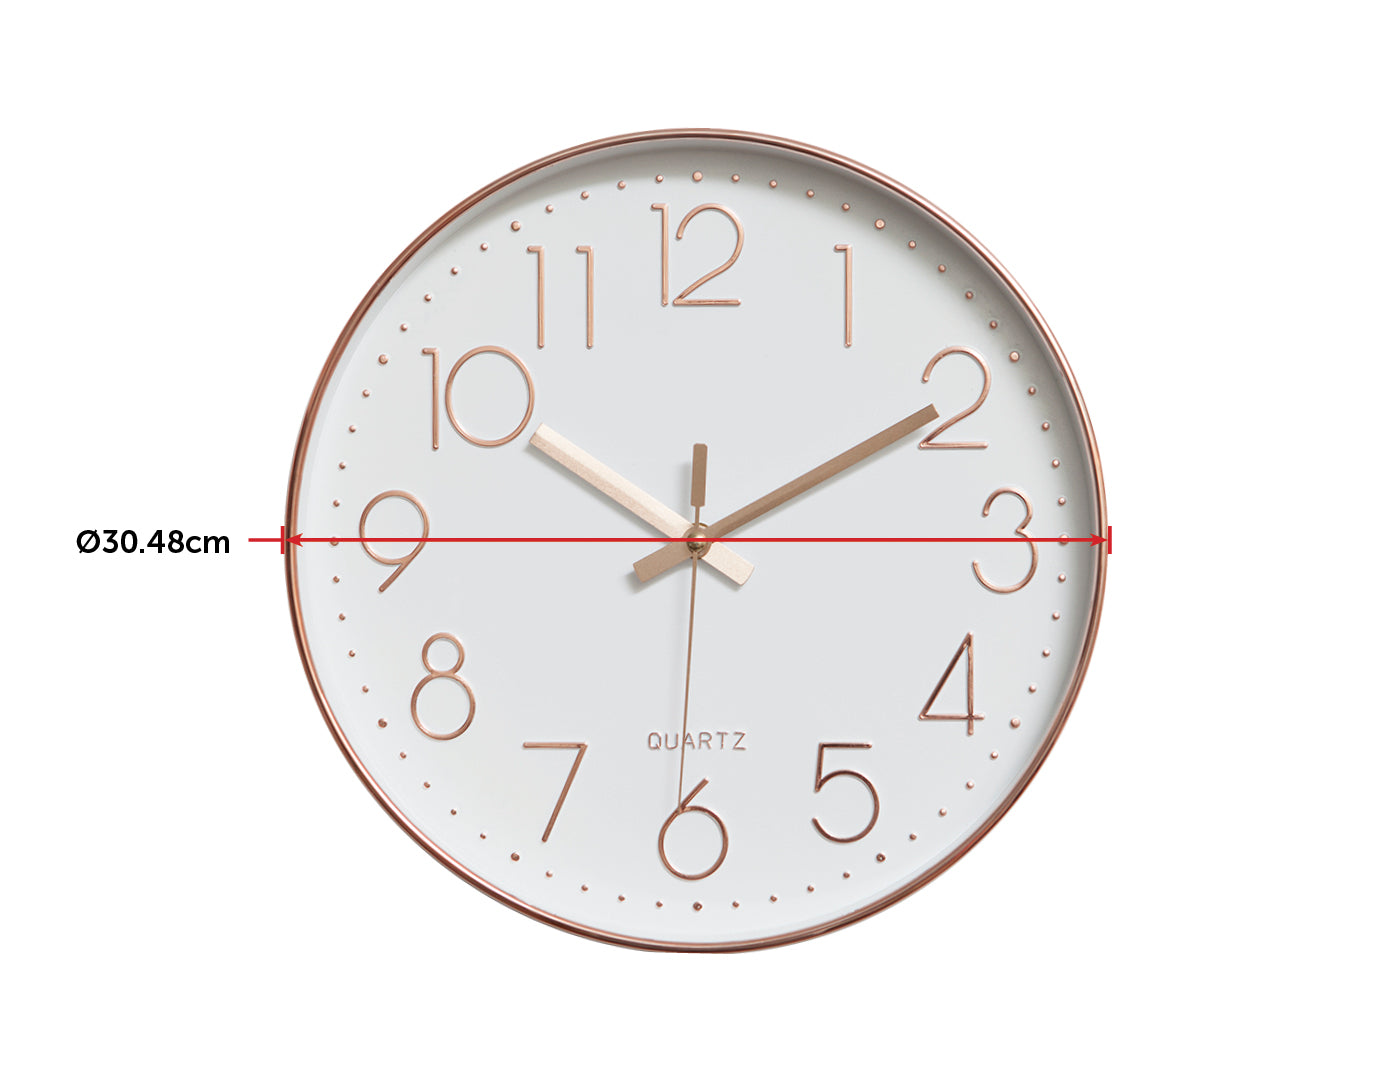 Modern Wall Clock Silent Non-Ticking Quartz Battery Operated Rose Gold - image2